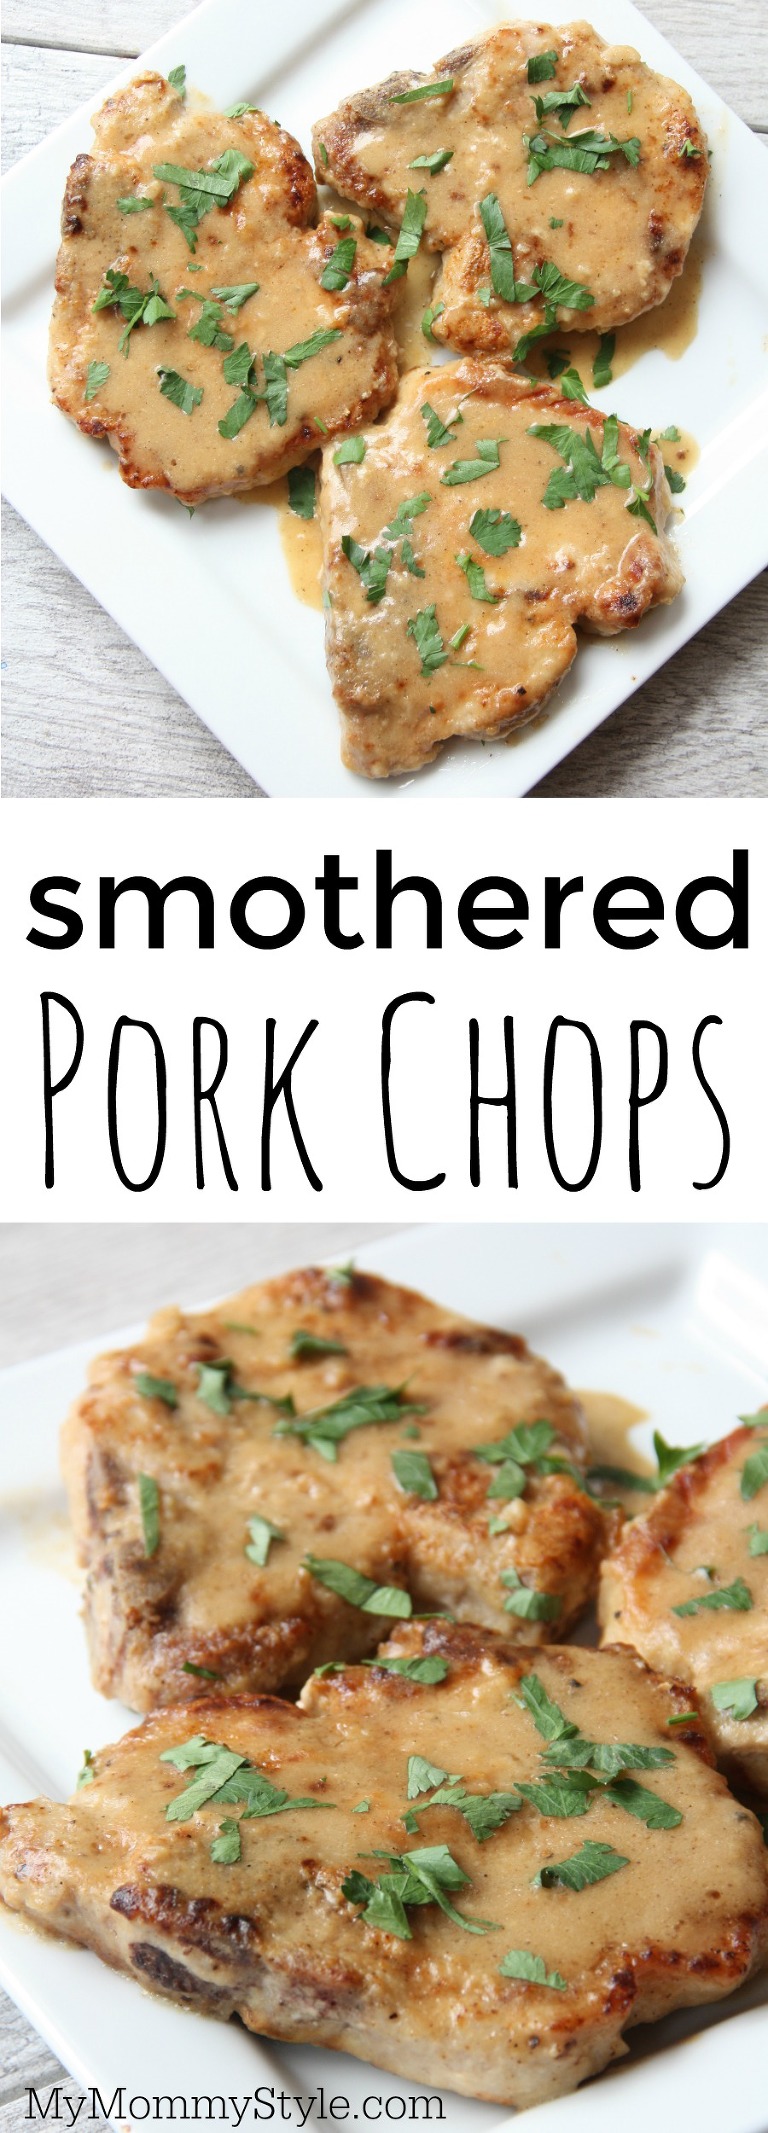 A delicious pork chop recipe that is a family favorite recipe. Even picky eaters will love this dinner. Baked pork chops smothered in a delicious and rich gravy.